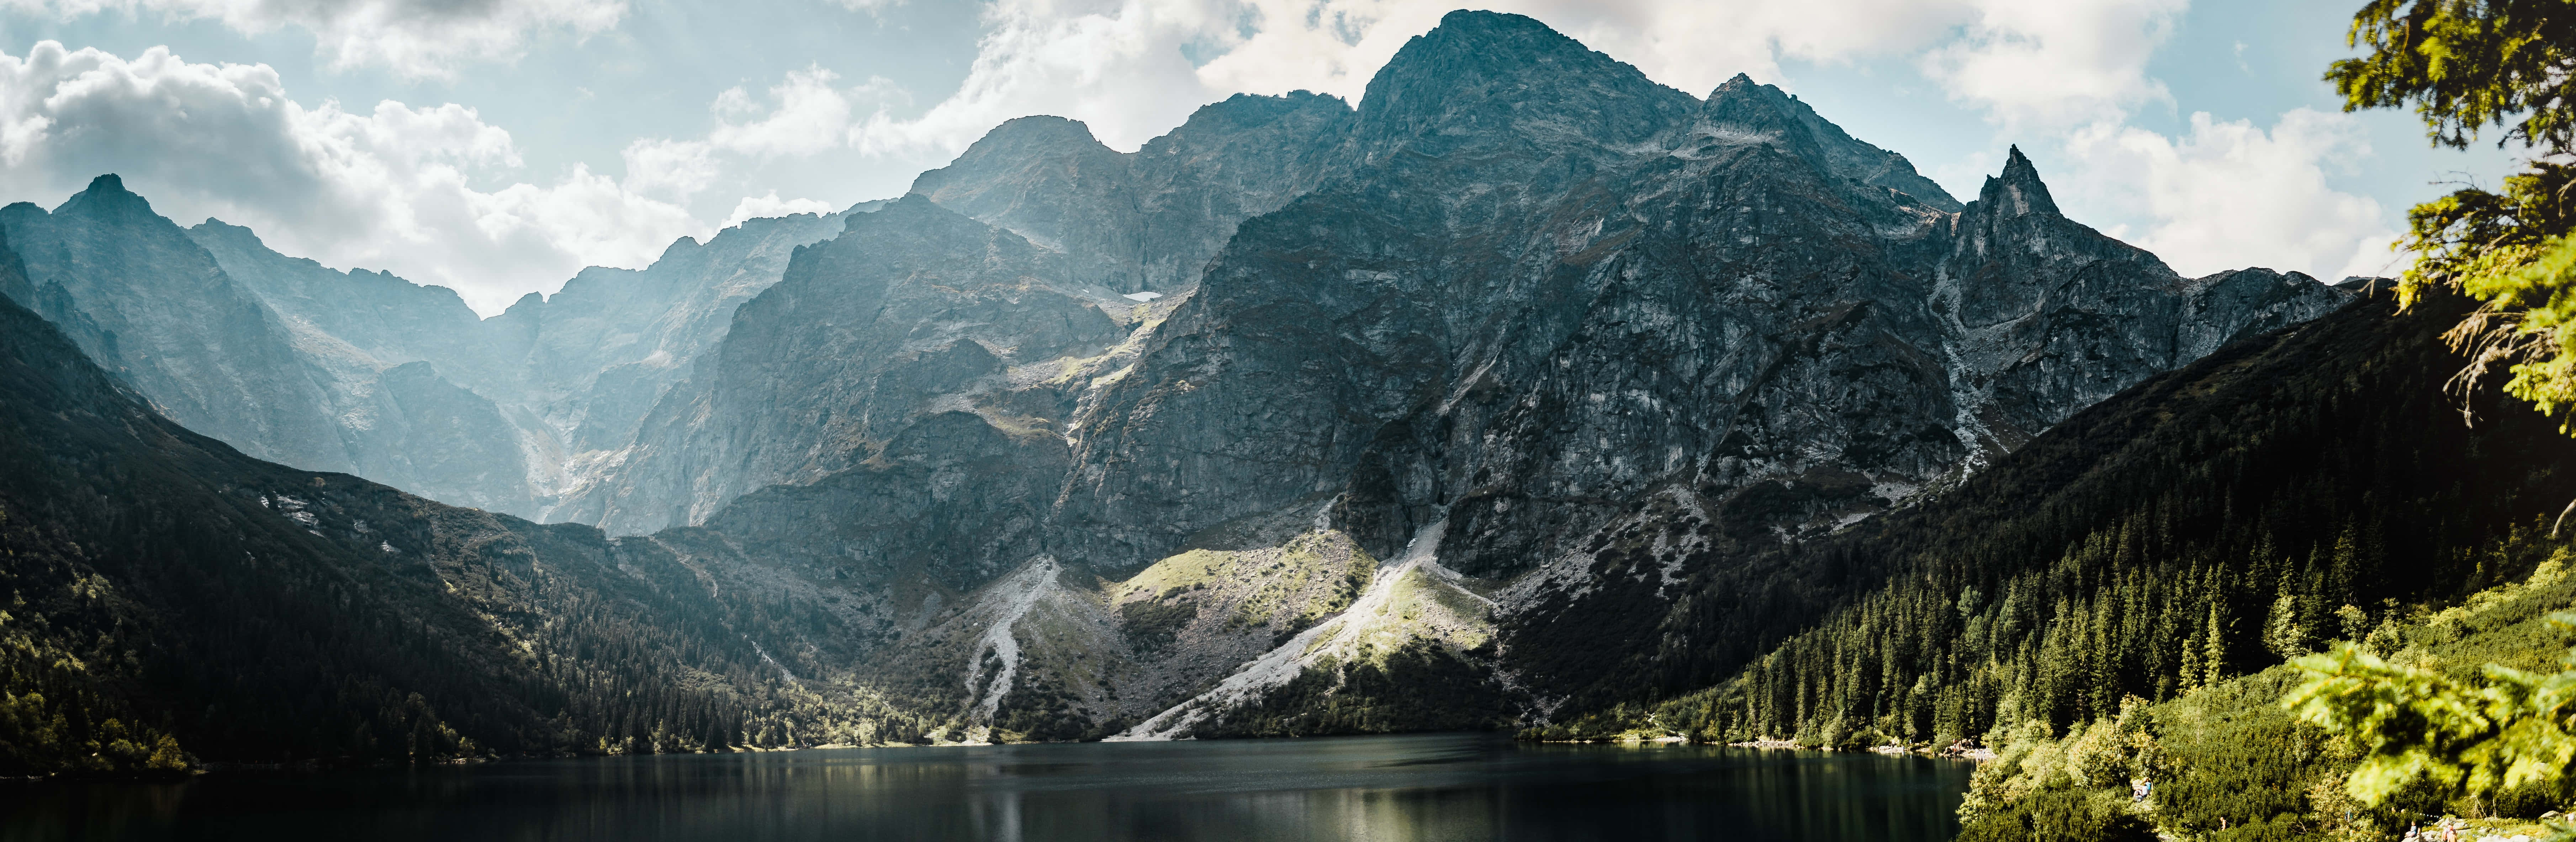 A Mountain Range With A Lake In The Background Wallpaper